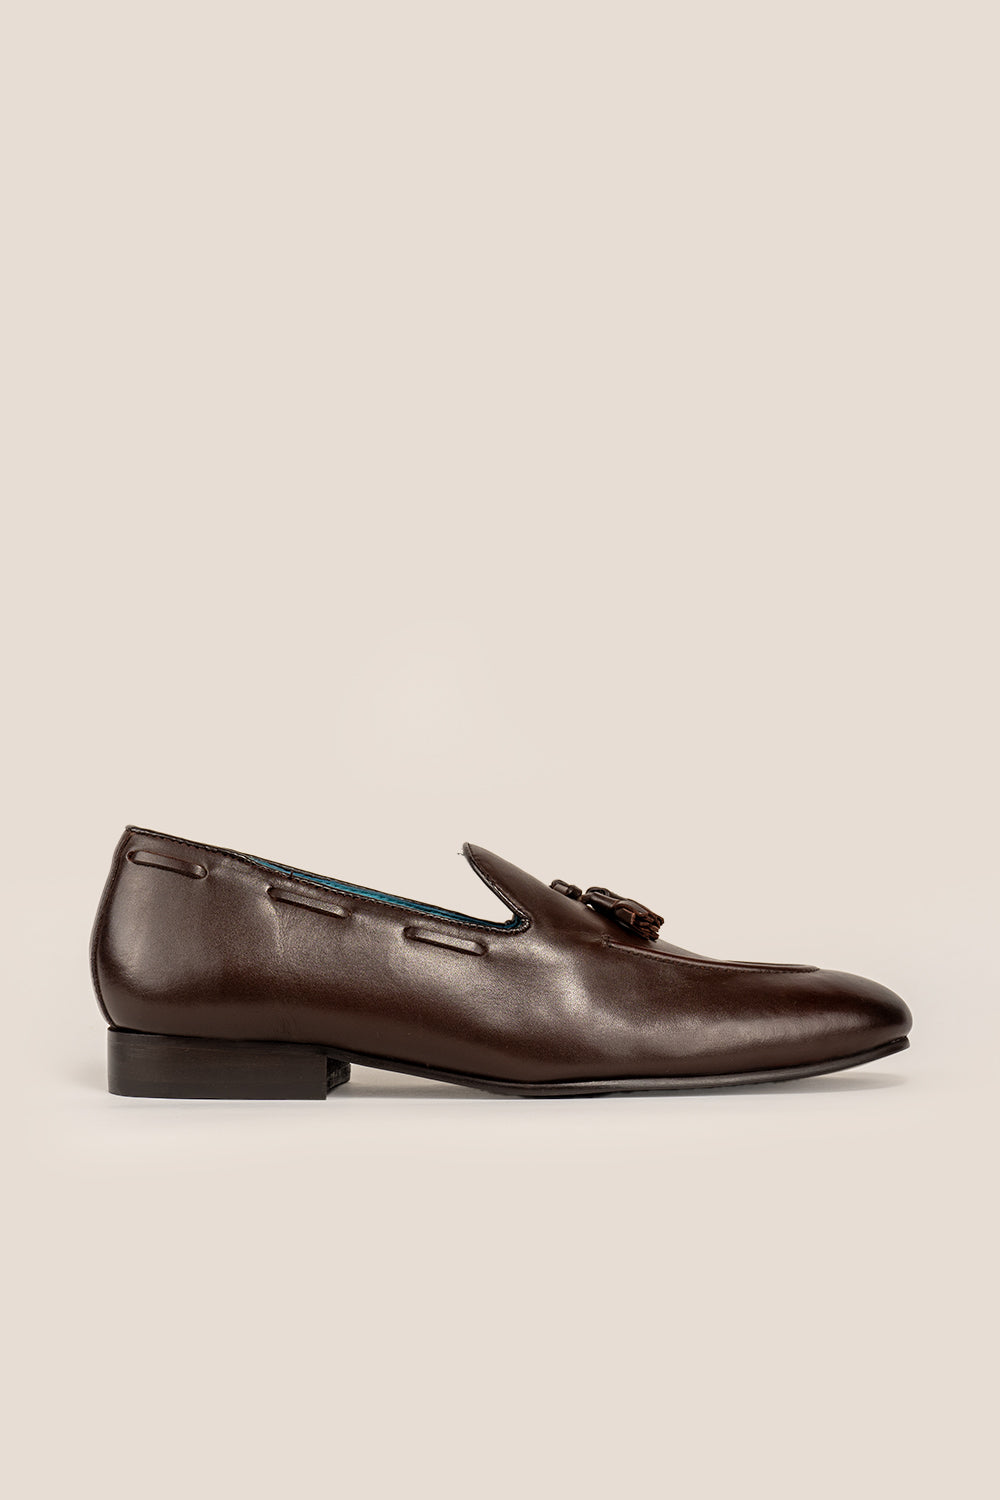 Alvin Brown Leather Loafers Oswin Hyde